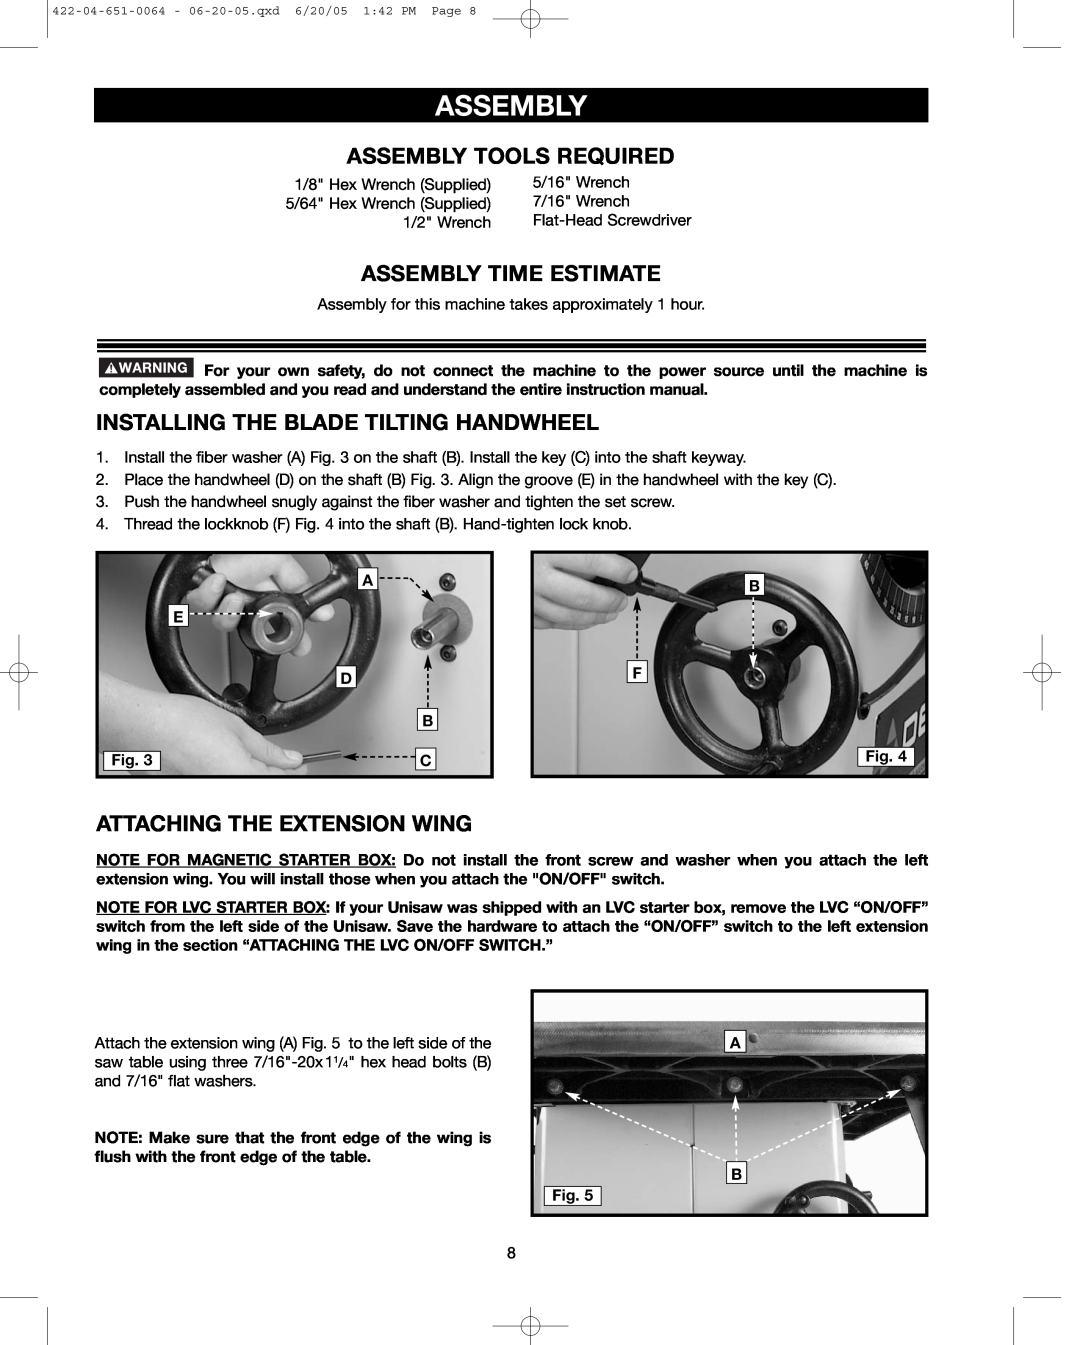 Delta 34-801 Assembly Tools Required, Assembly Time Estimate, Installing The Blade Tilting Handwheel, A E D B C 